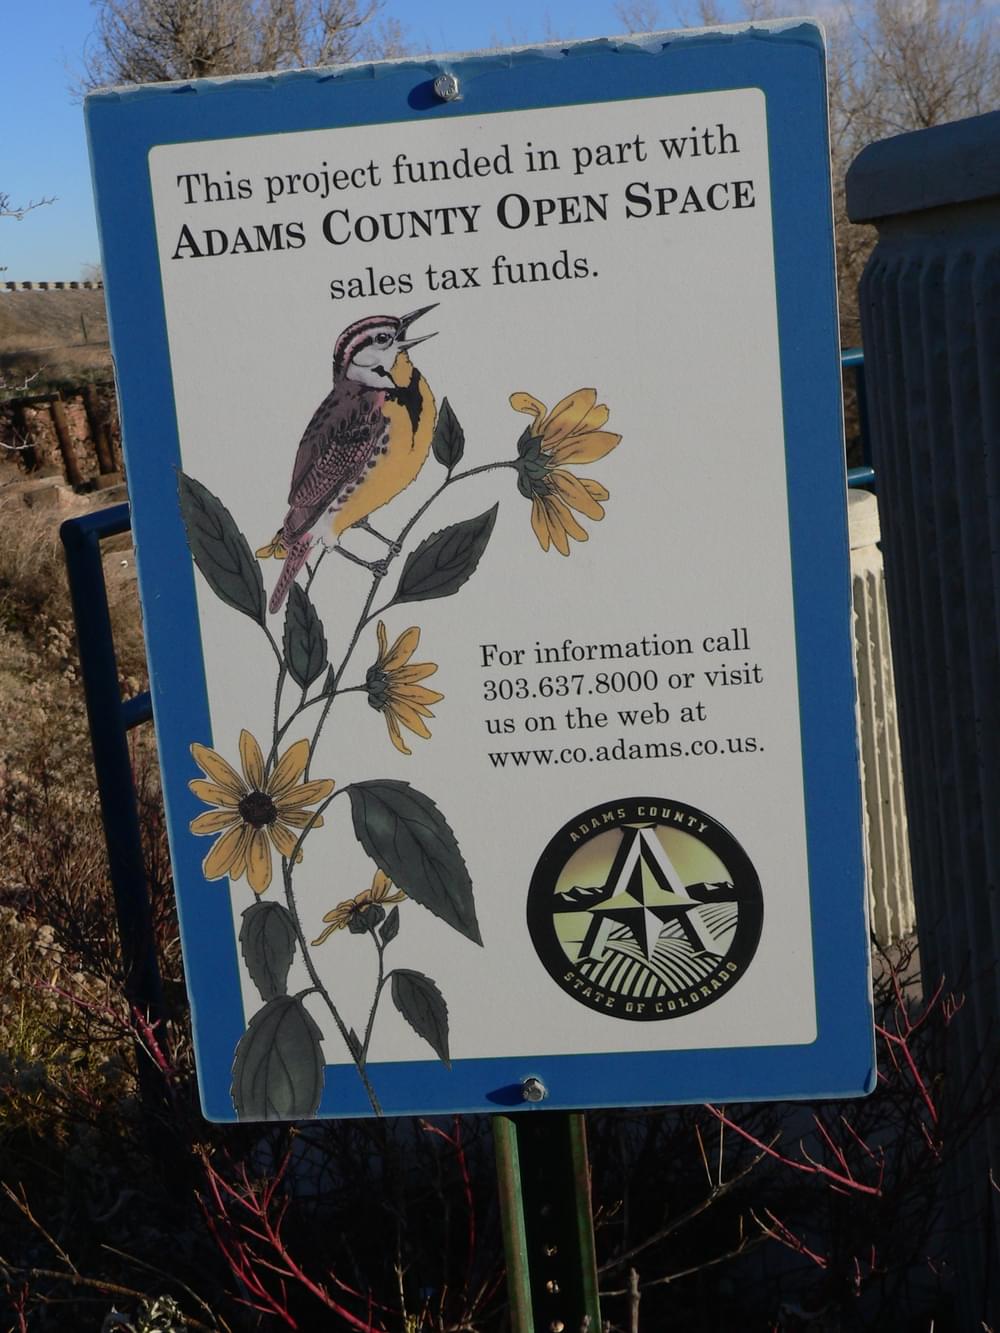 Adams County in the Denver Metro area has a sales tax for trails and open space, including this project on the Sand Creek Trail.